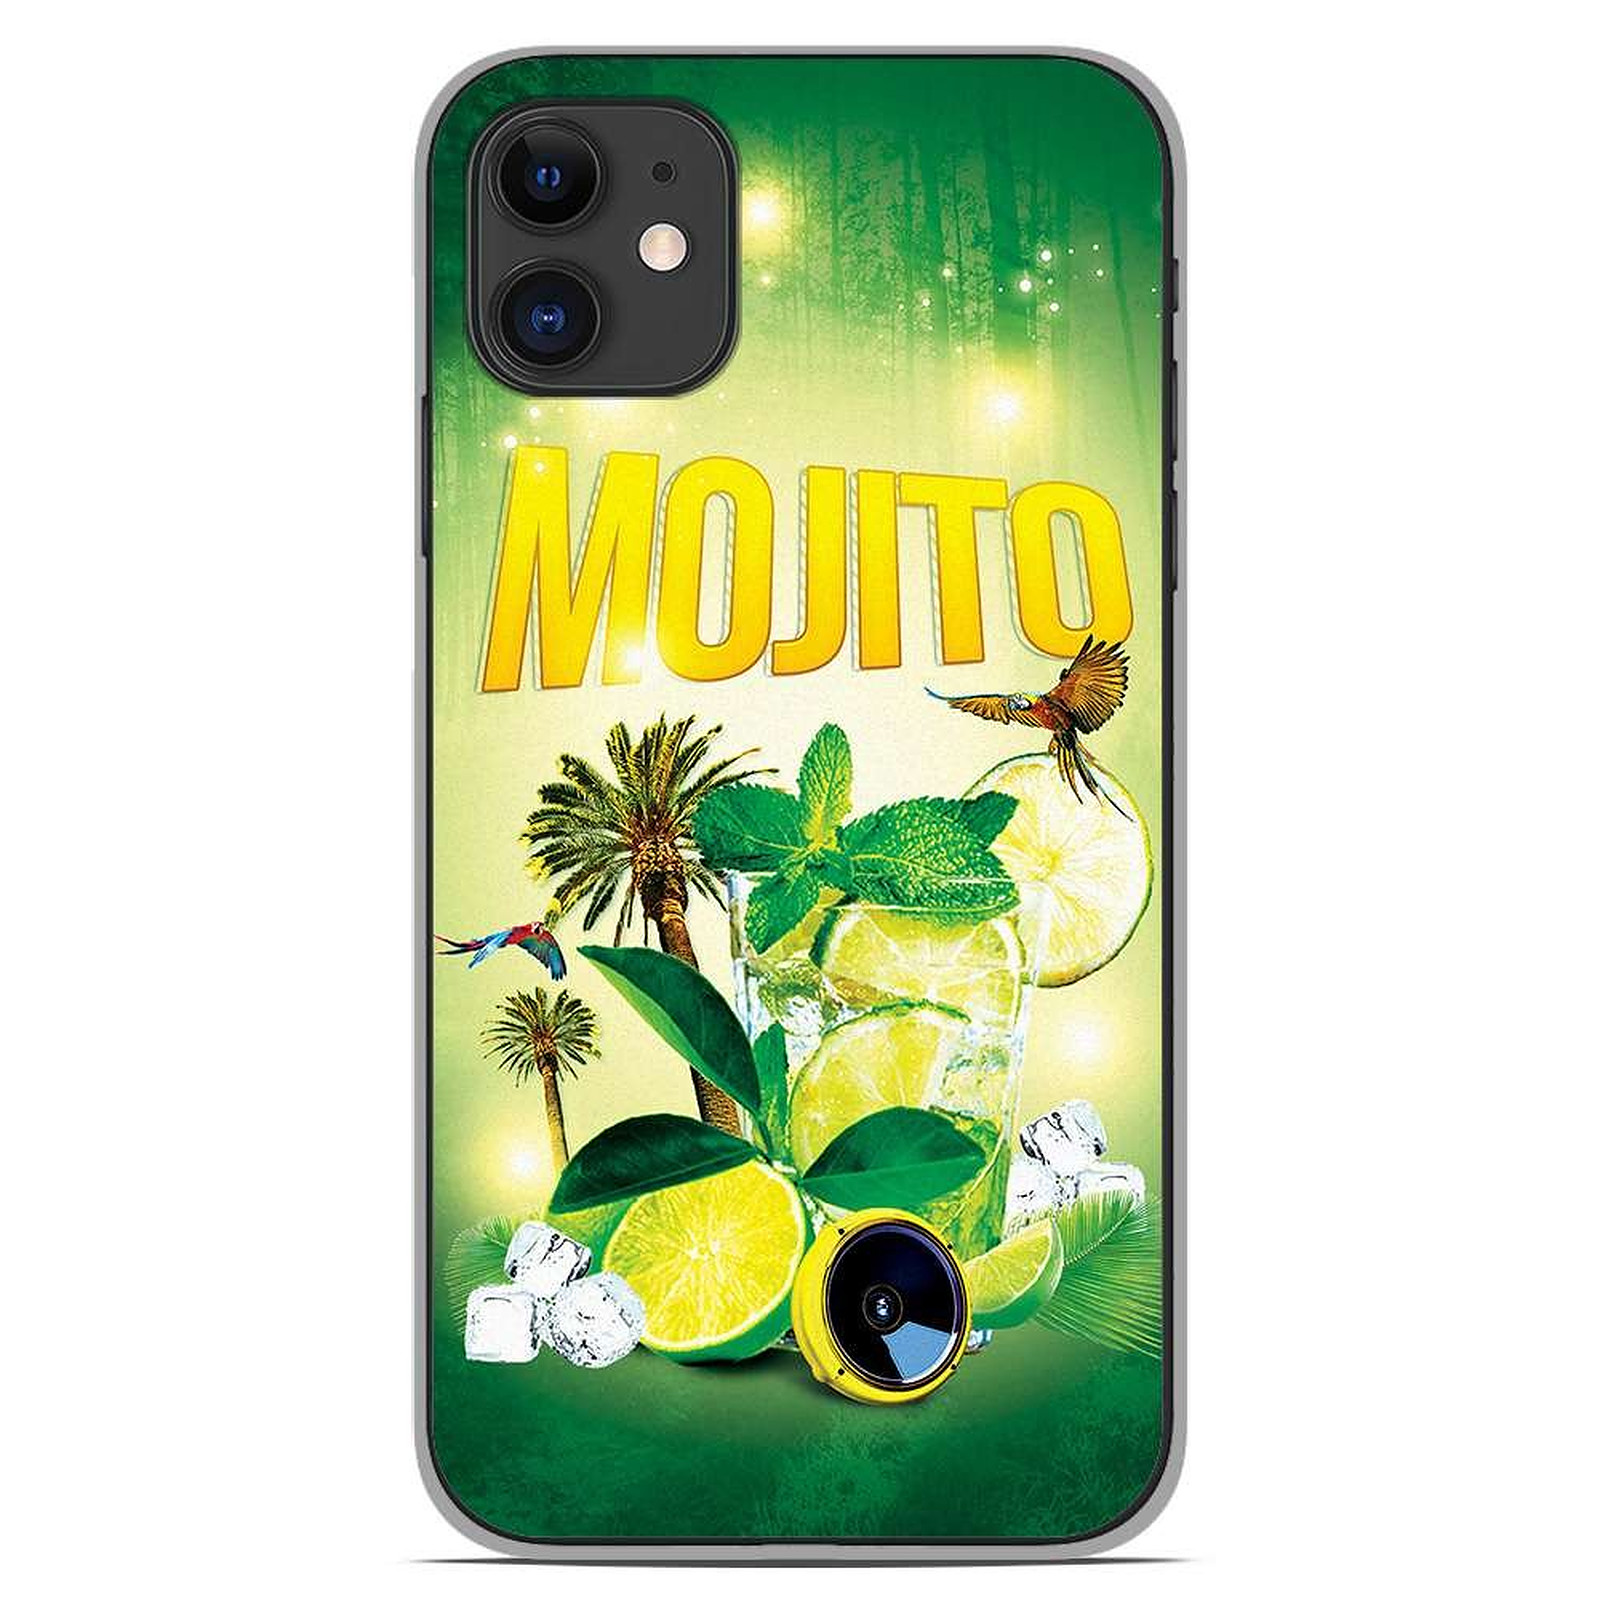 1001 Coques Coque silicone gel Apple iPhone 11 motif Mojito Foret - Coque telephone 1001Coques